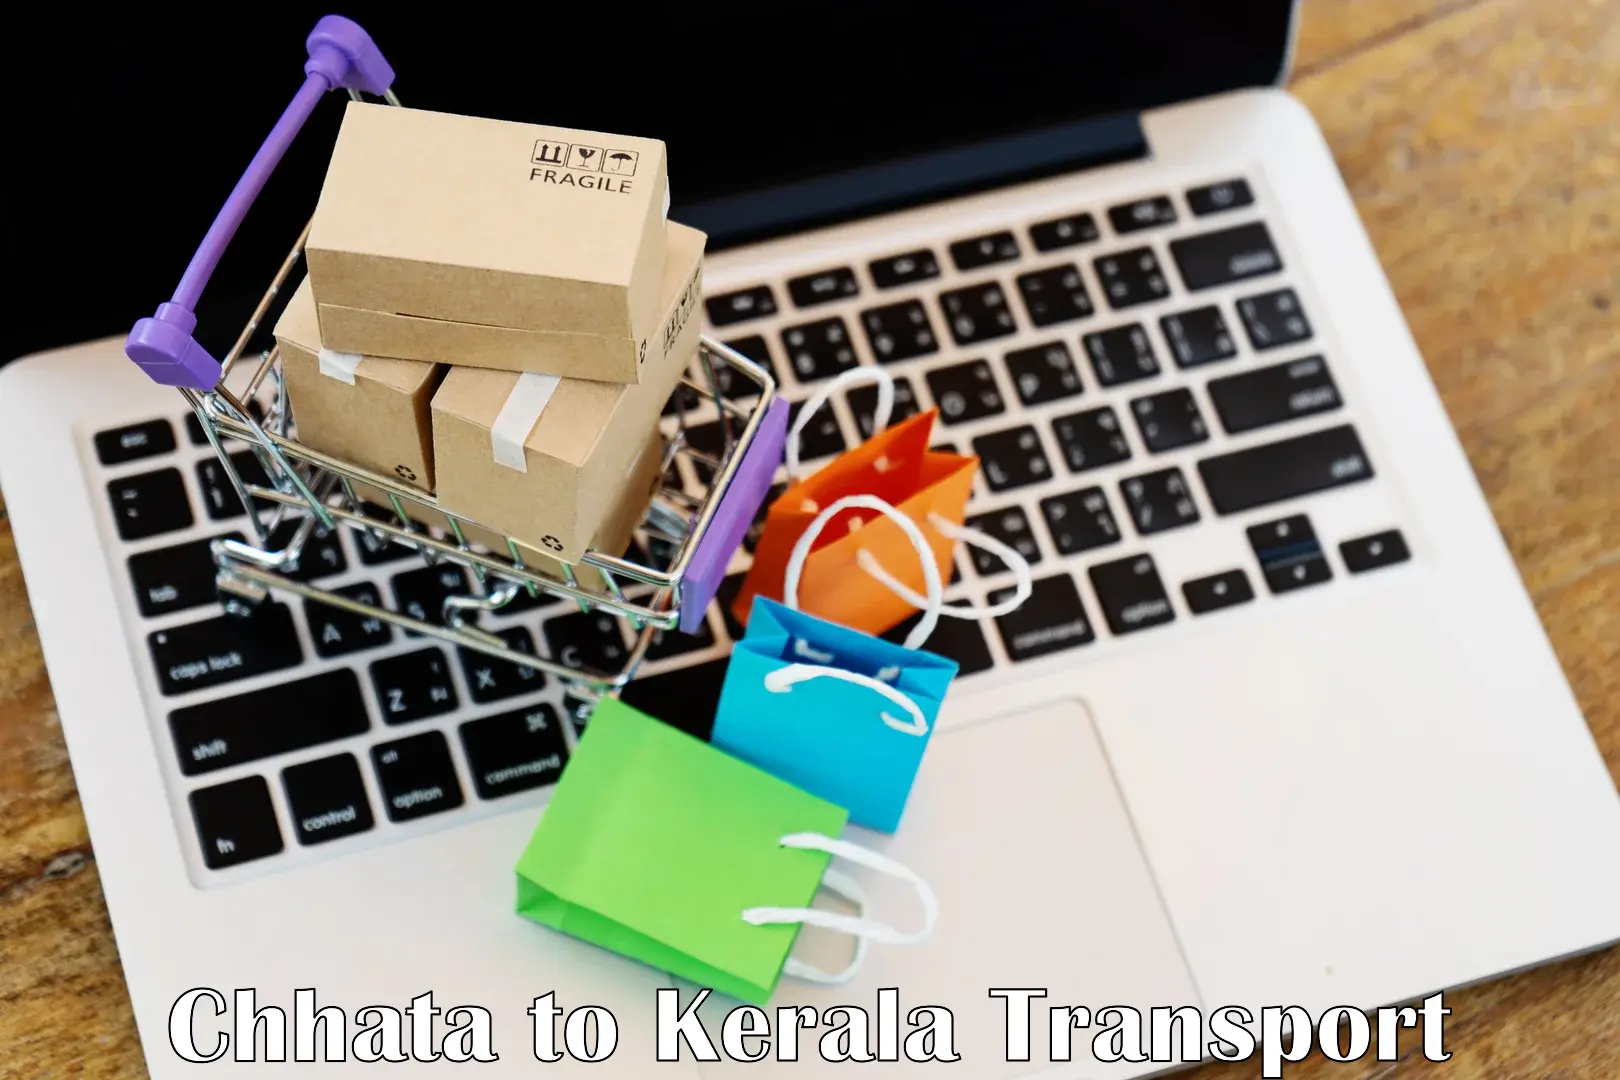 Online transport in Chhata to Mahe